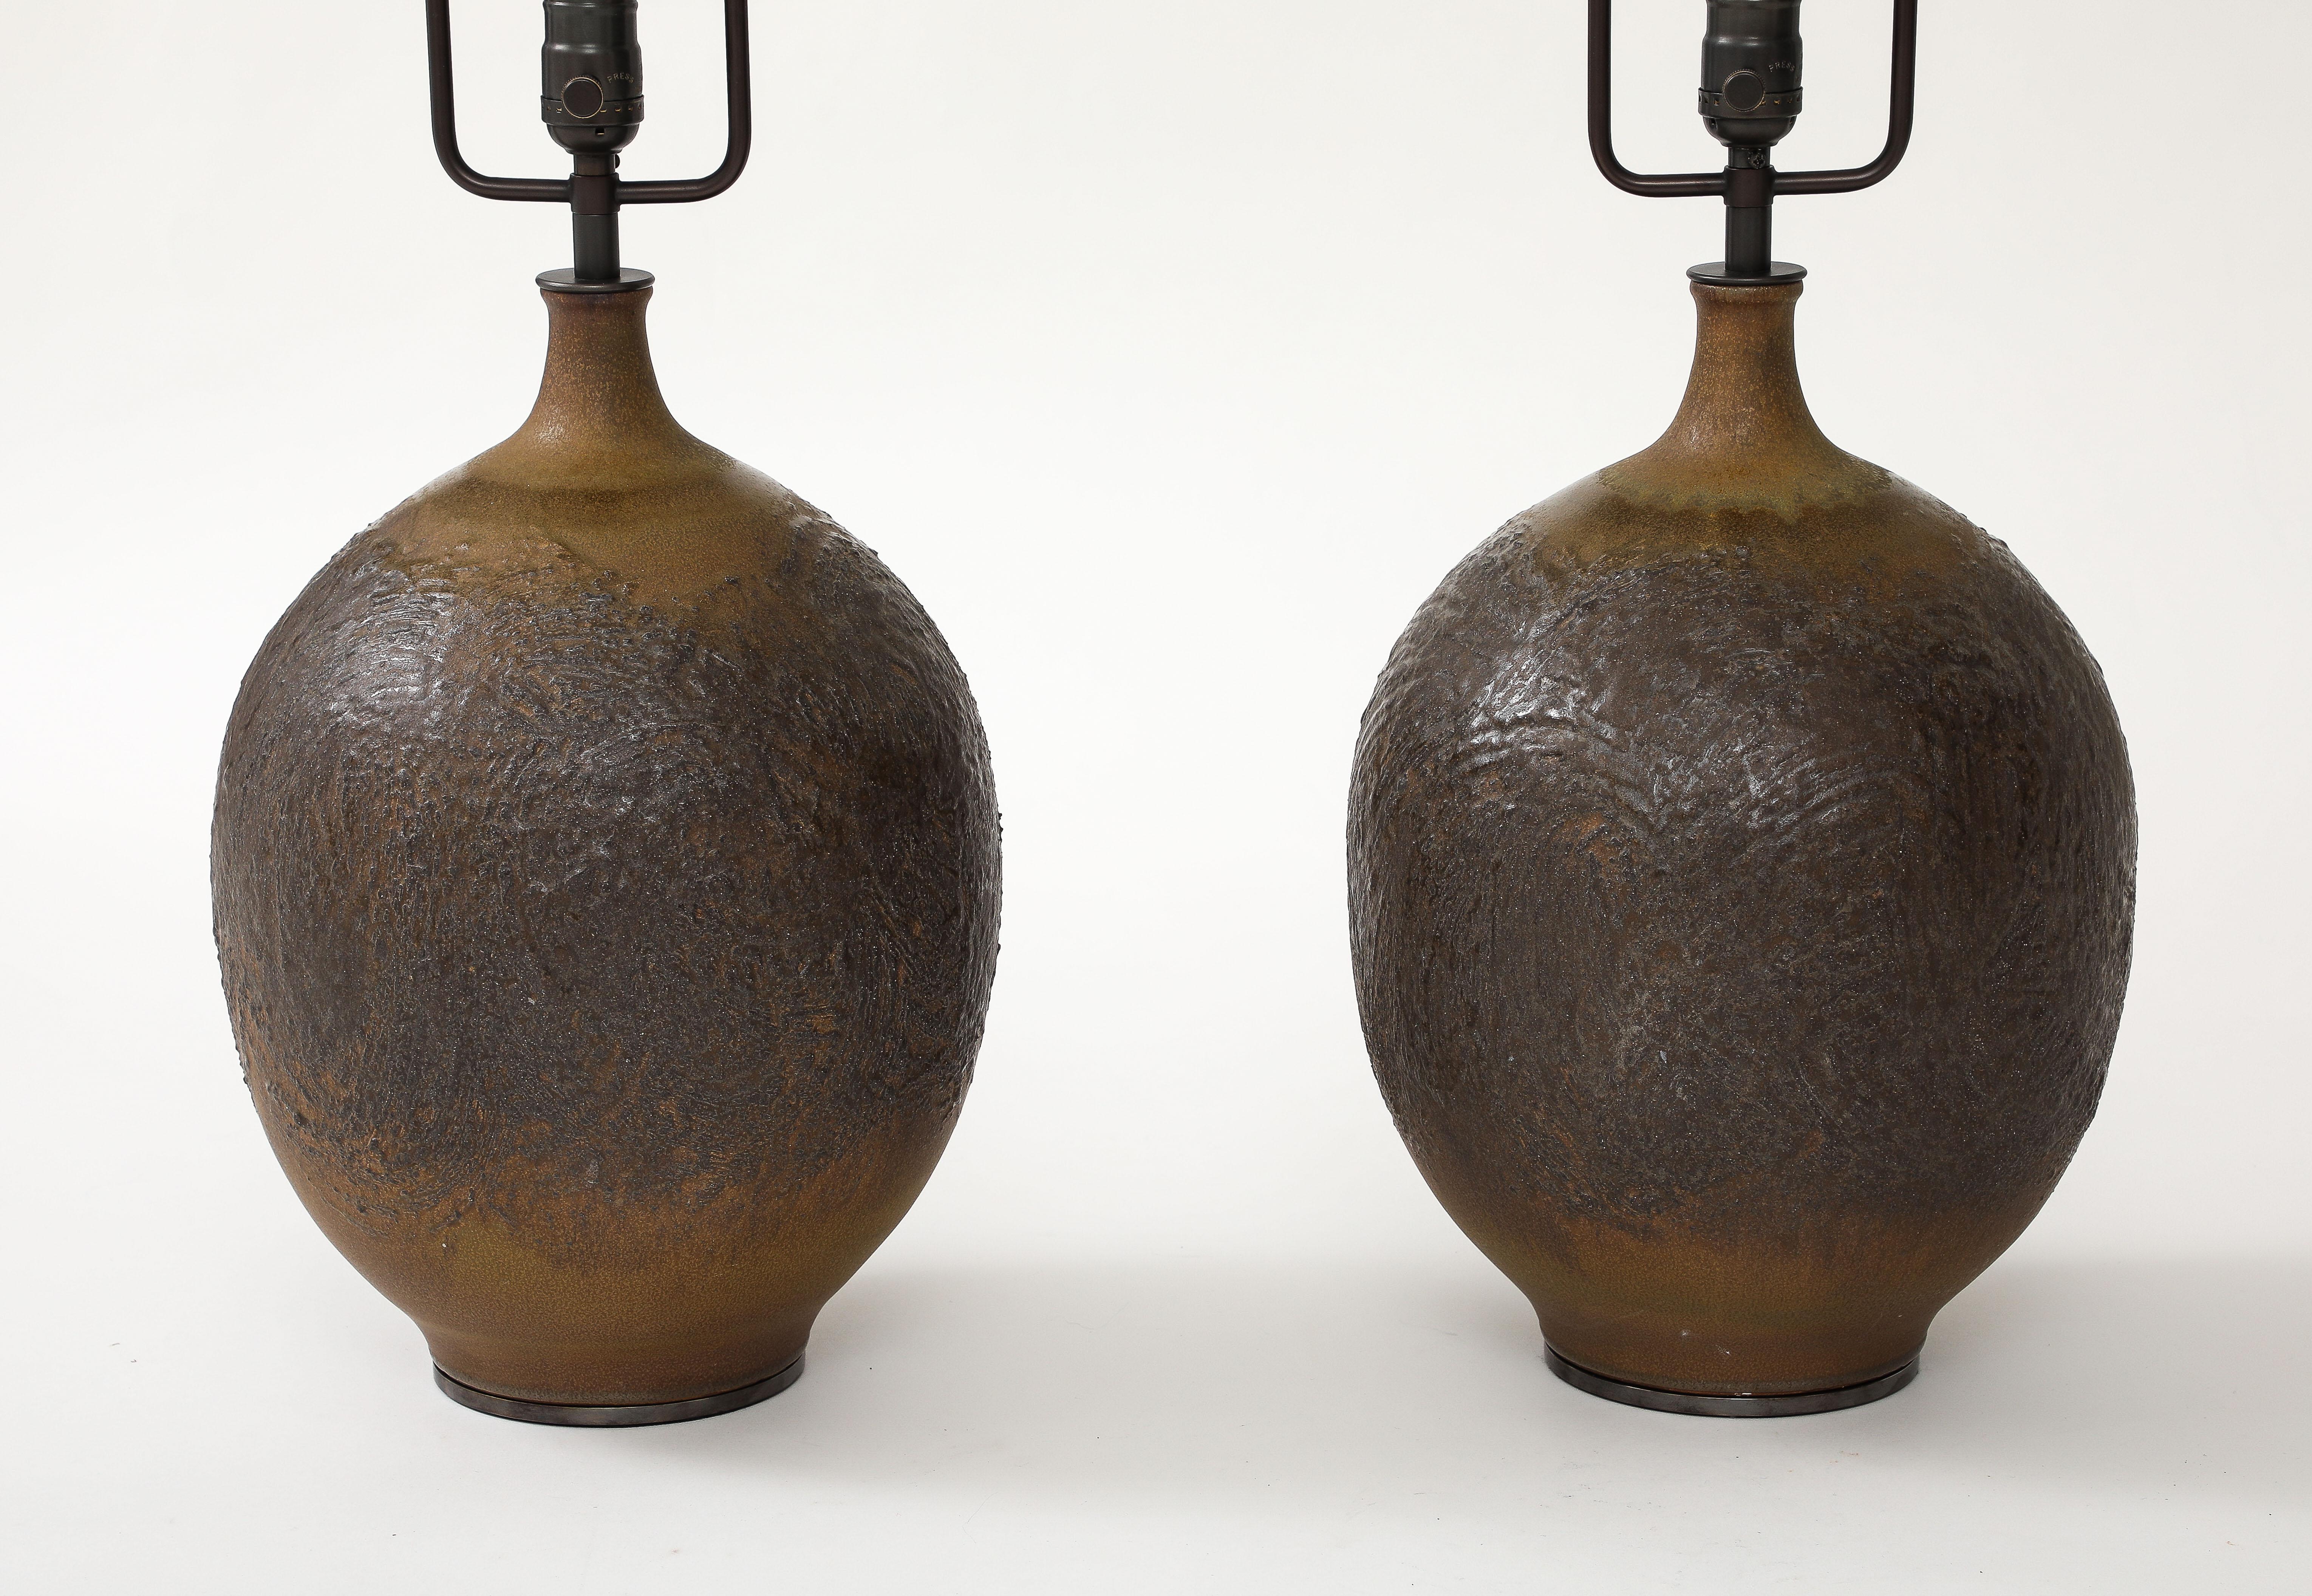 Mid-20th Century Pair of Glazed Ceramic Lamps by Design Technics, United States, c. 1950 For Sale